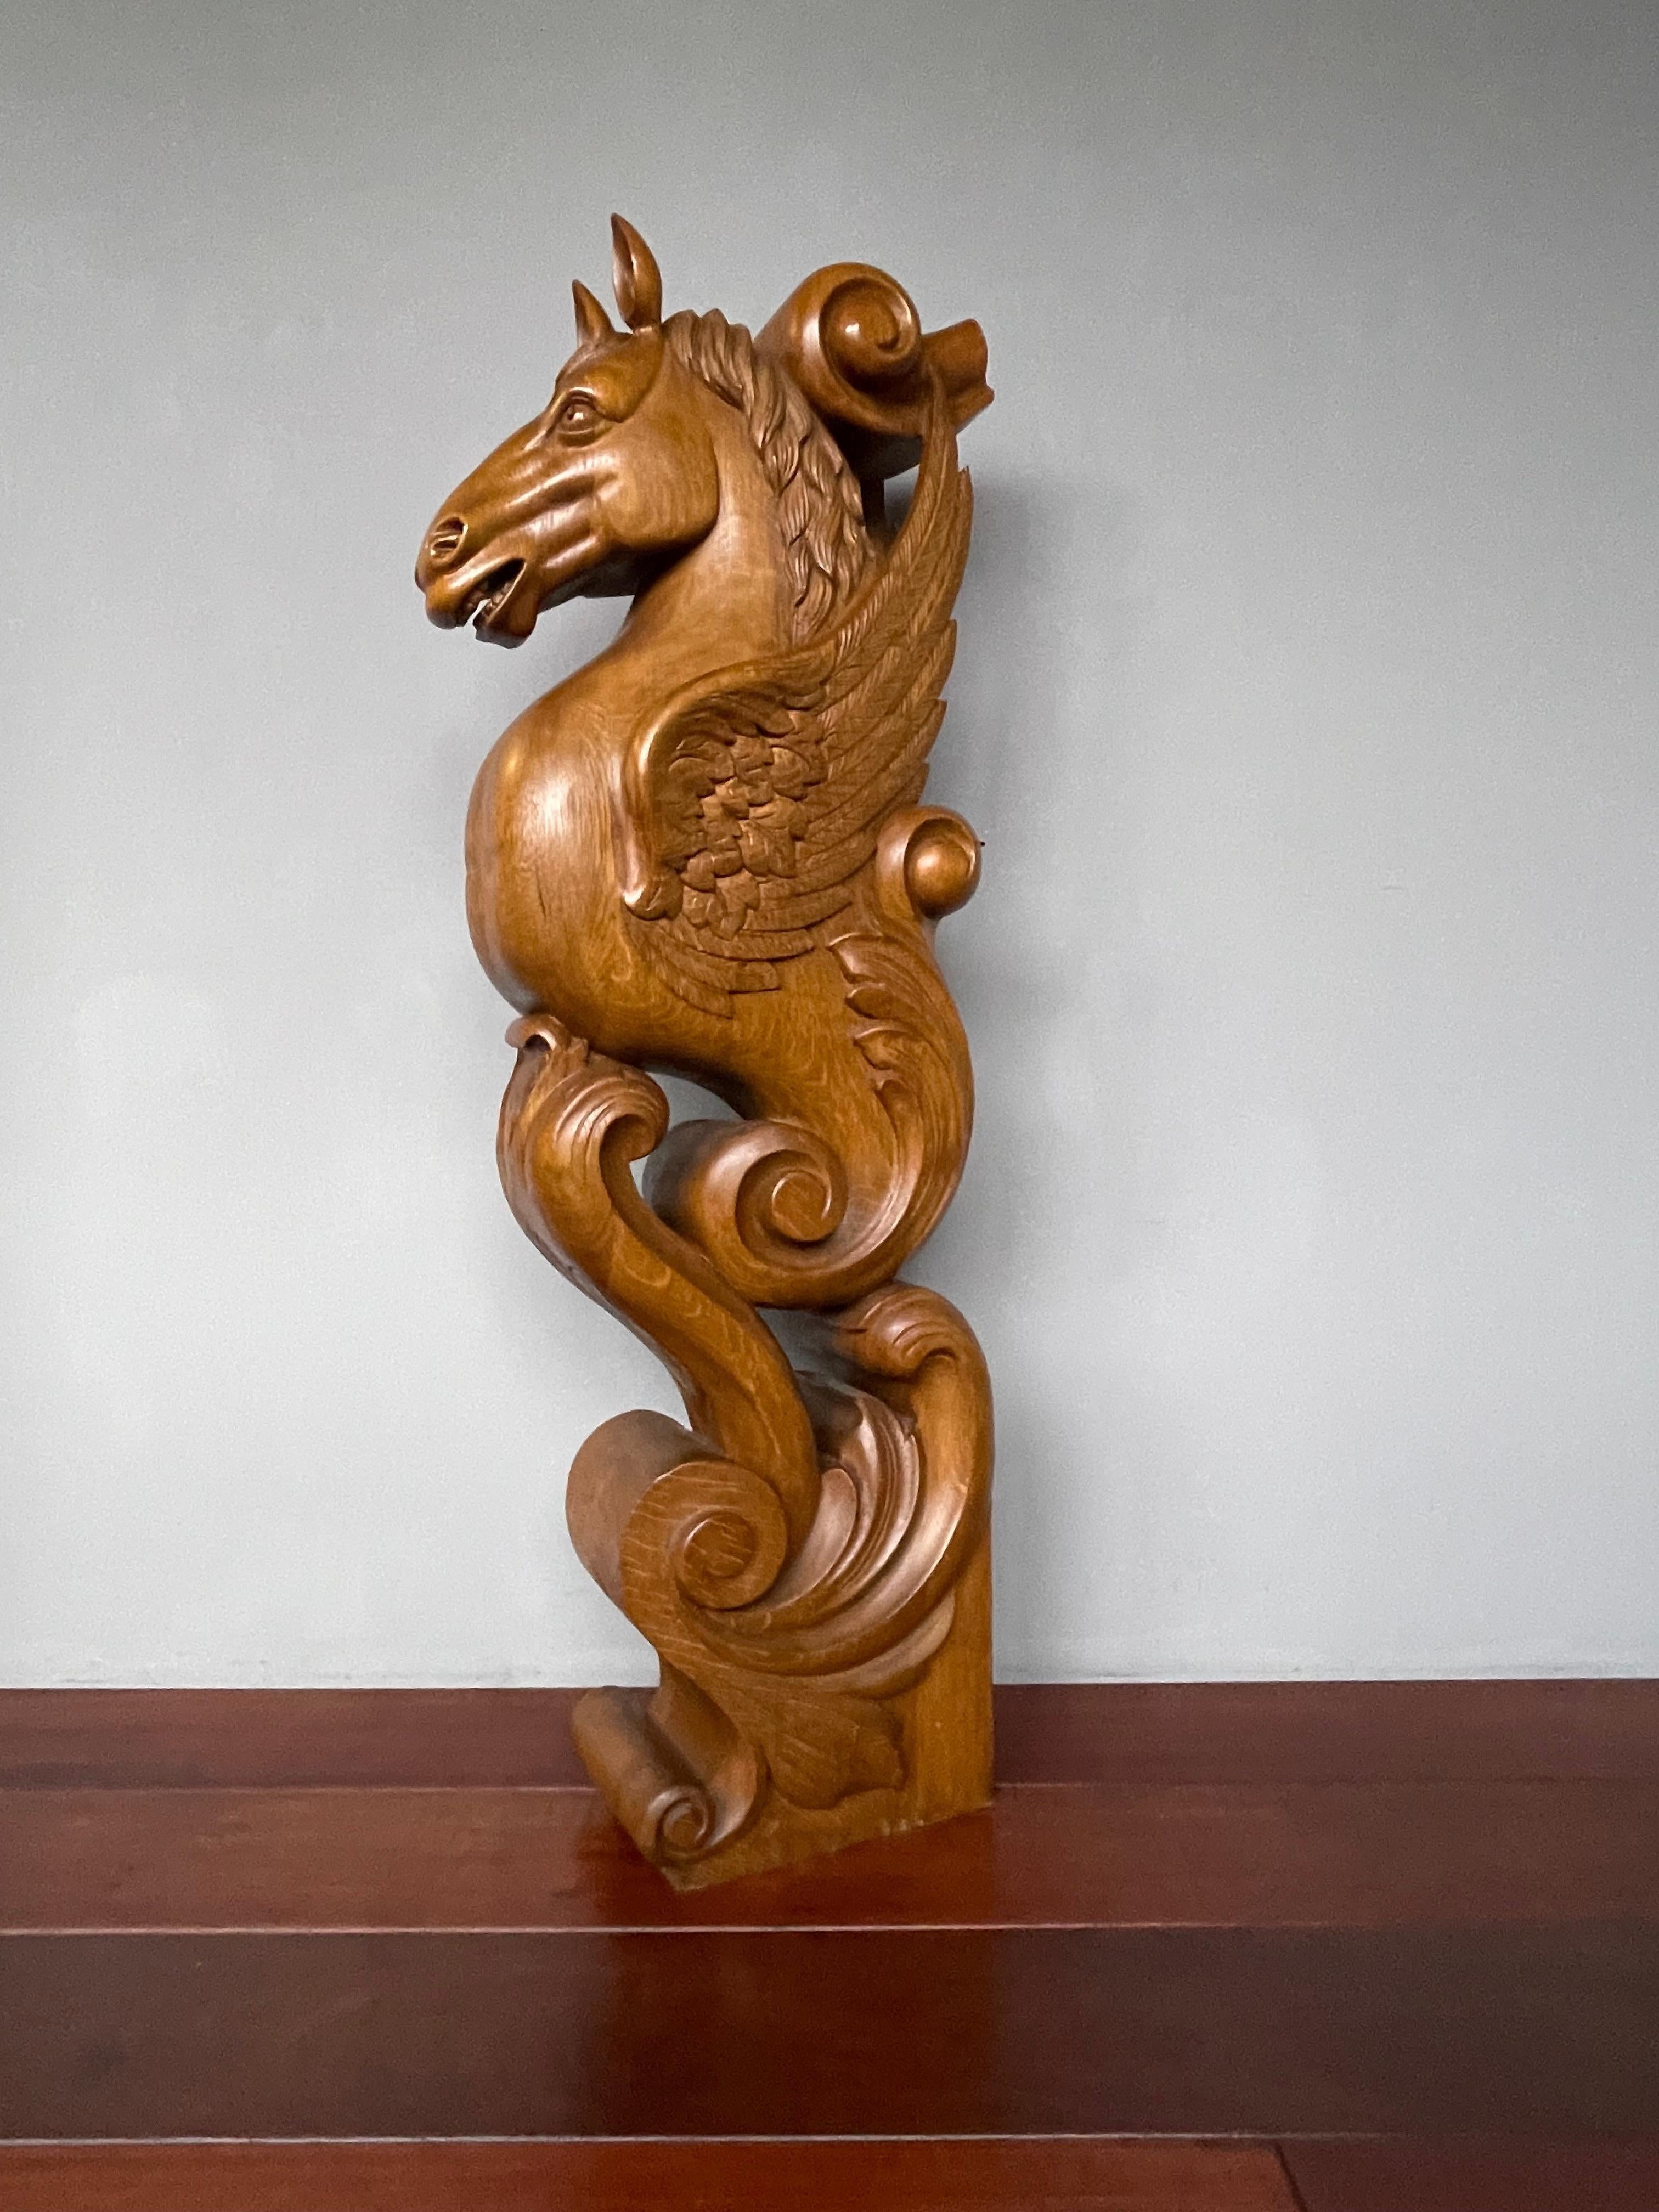 One of a kind, sculptural stair newel post.

Because of its large size, its top quality workmanship, its subject matter and its excellent condition we were immediately sold when we first saw this awesome, newel-post-Pegasus-sculpture. Even if you